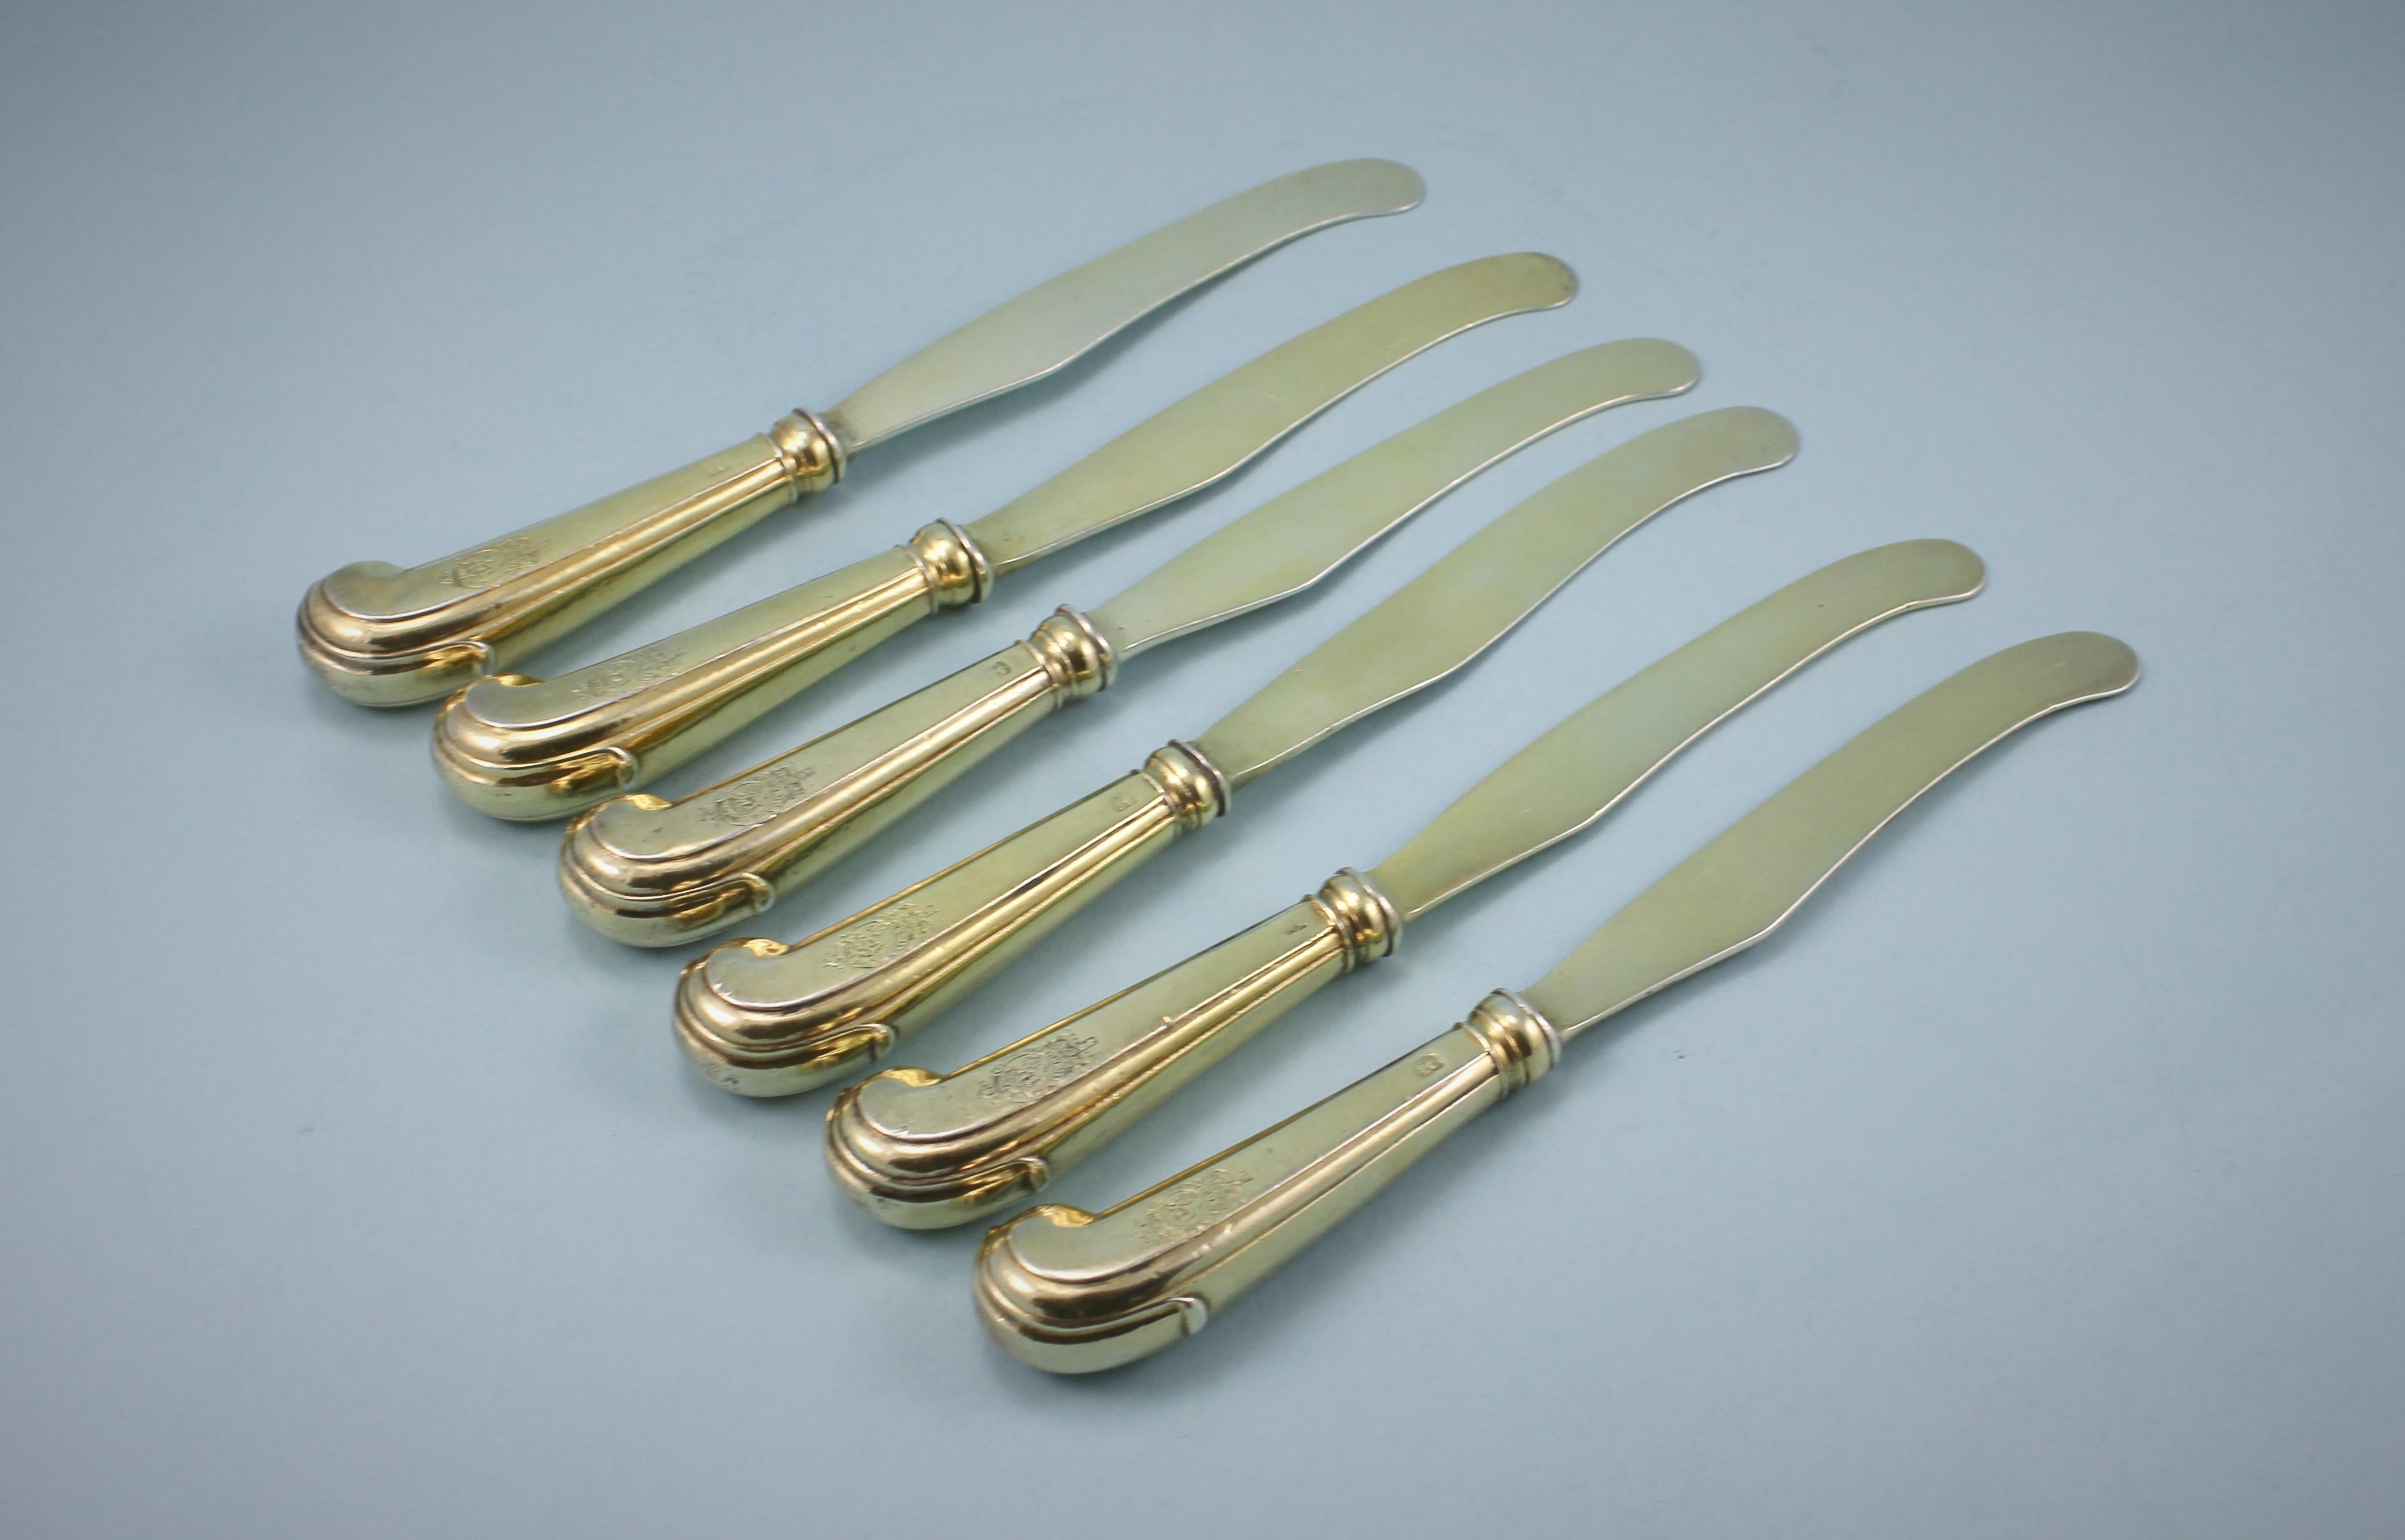 Handsome set of six George III silver gilt dessert knives.
Maker: William Abdy I. London circa 1765
The crest on one side of the handle shows the Royal crest, coronet and Garter motto as used by Ambassadors and Ministers as well as the